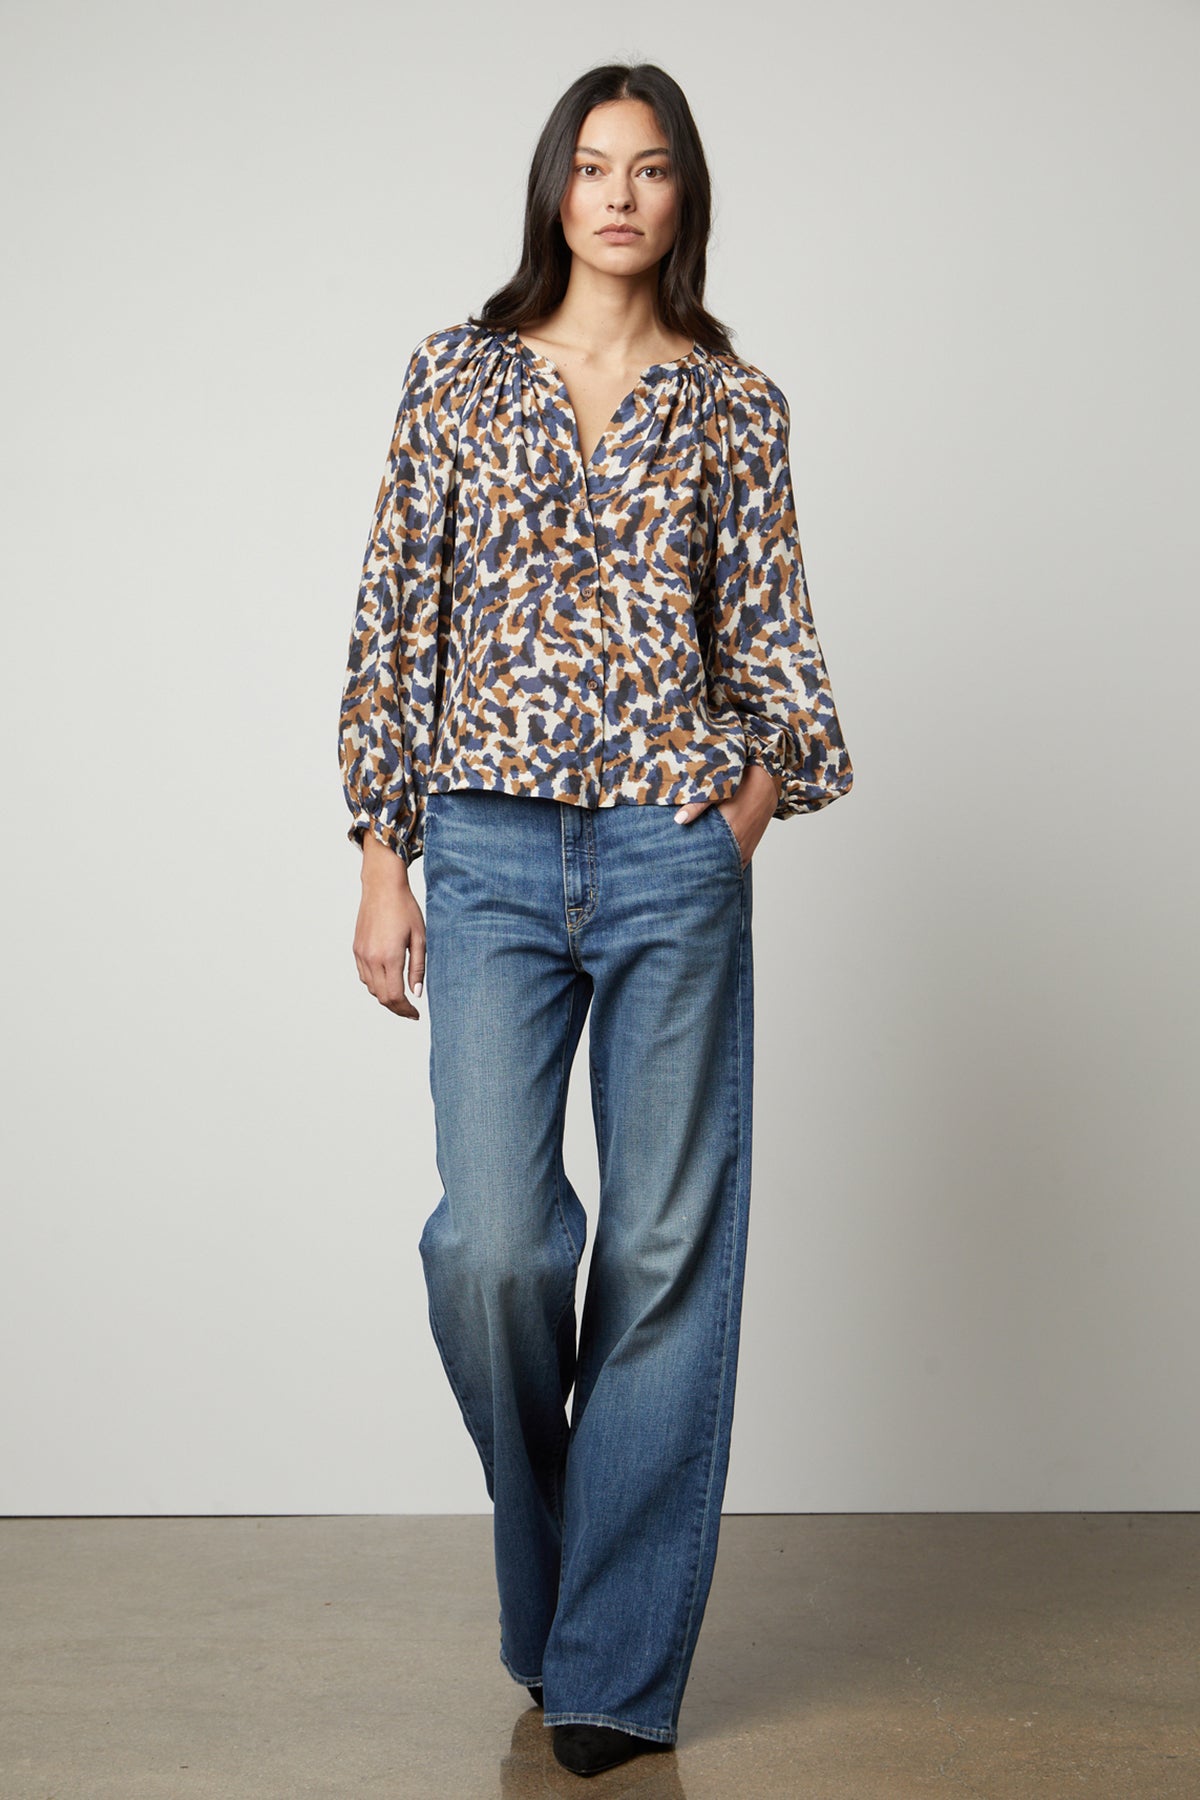 The model is wearing a Graham & Spencer Melinda Printed Button-Up Top.-26895474524353